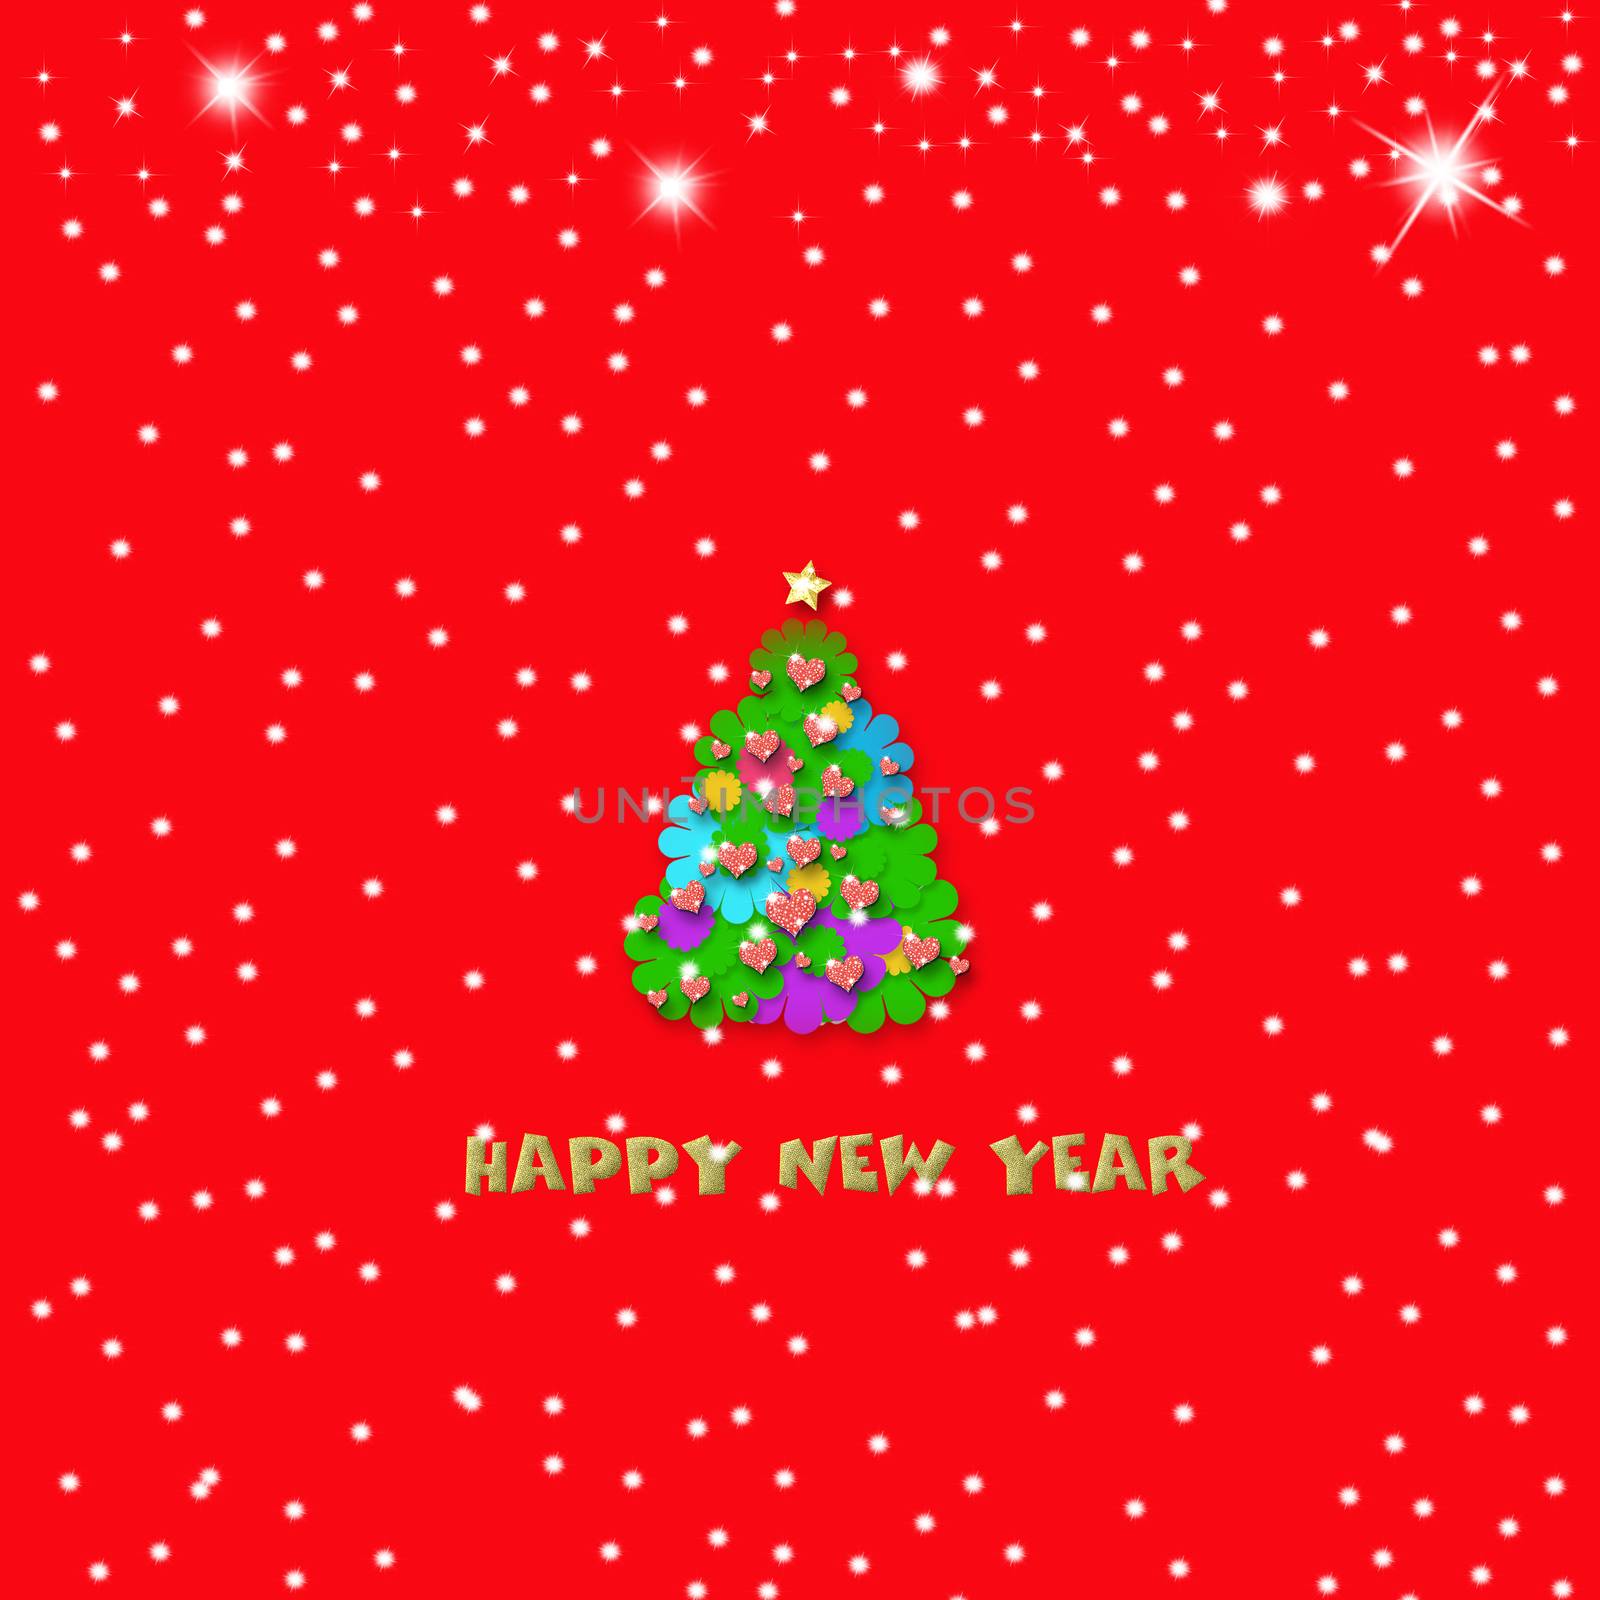 Happy New Year Christmas card by Carche